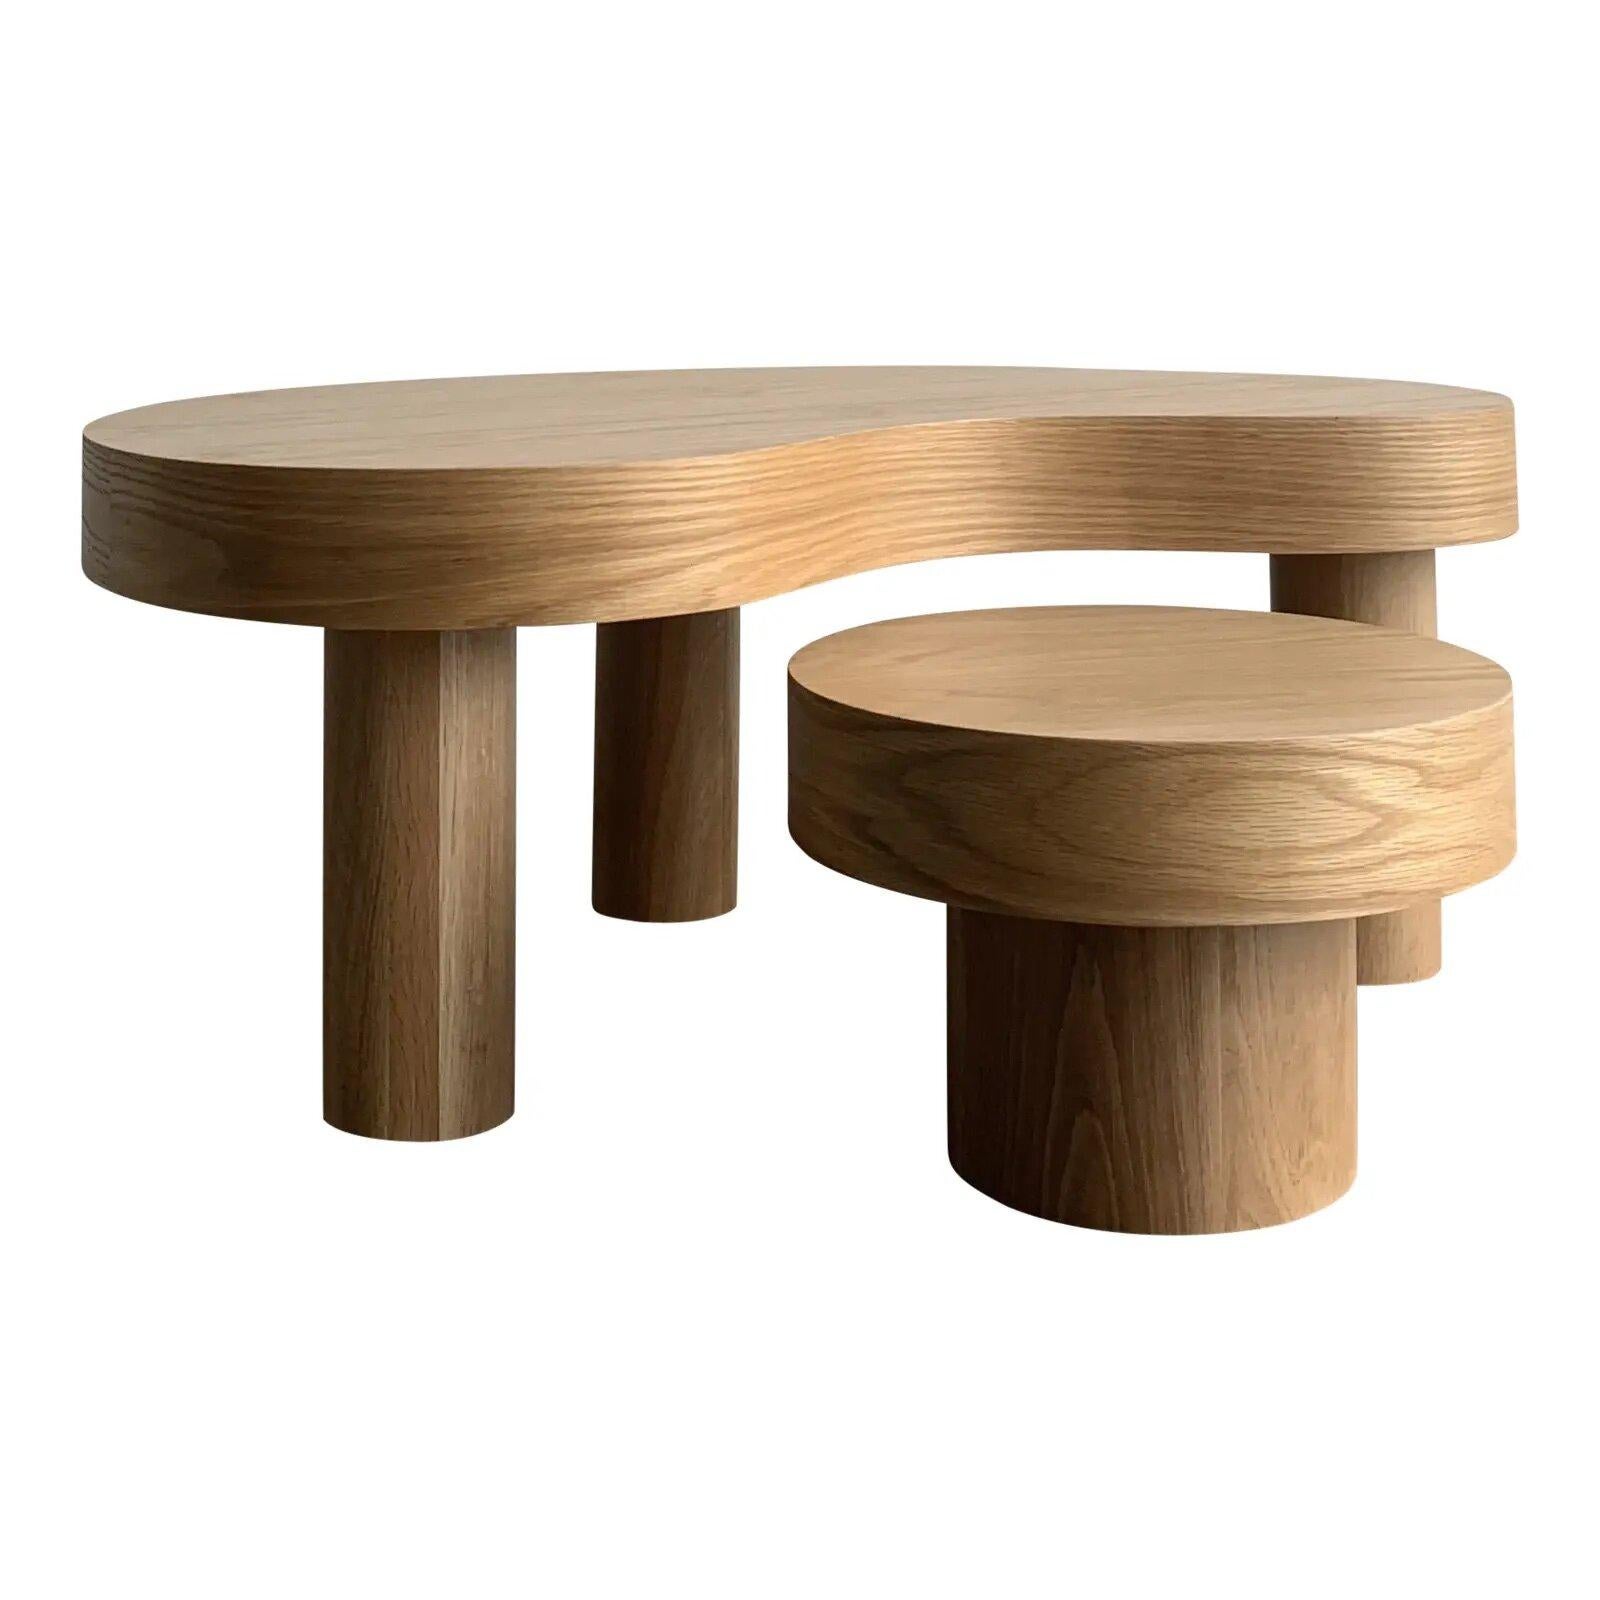 Modern Made To Order Smallest Version- Kidney Two Tiered Coffee Table Set For Sale